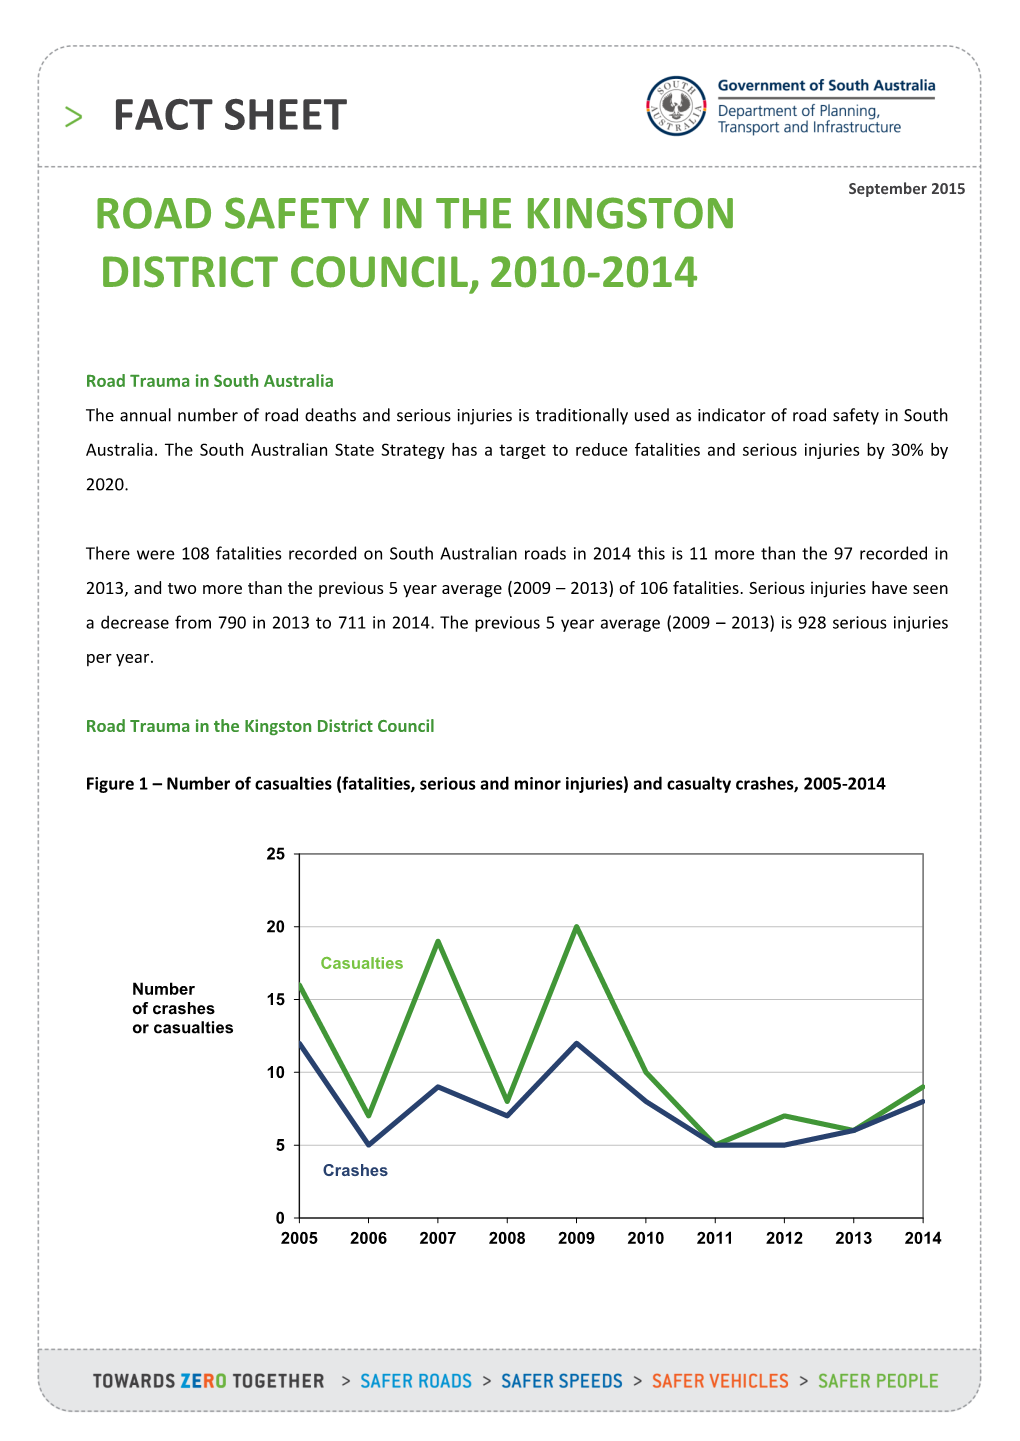 Road Safety in the Kingston District Council,2010-2014